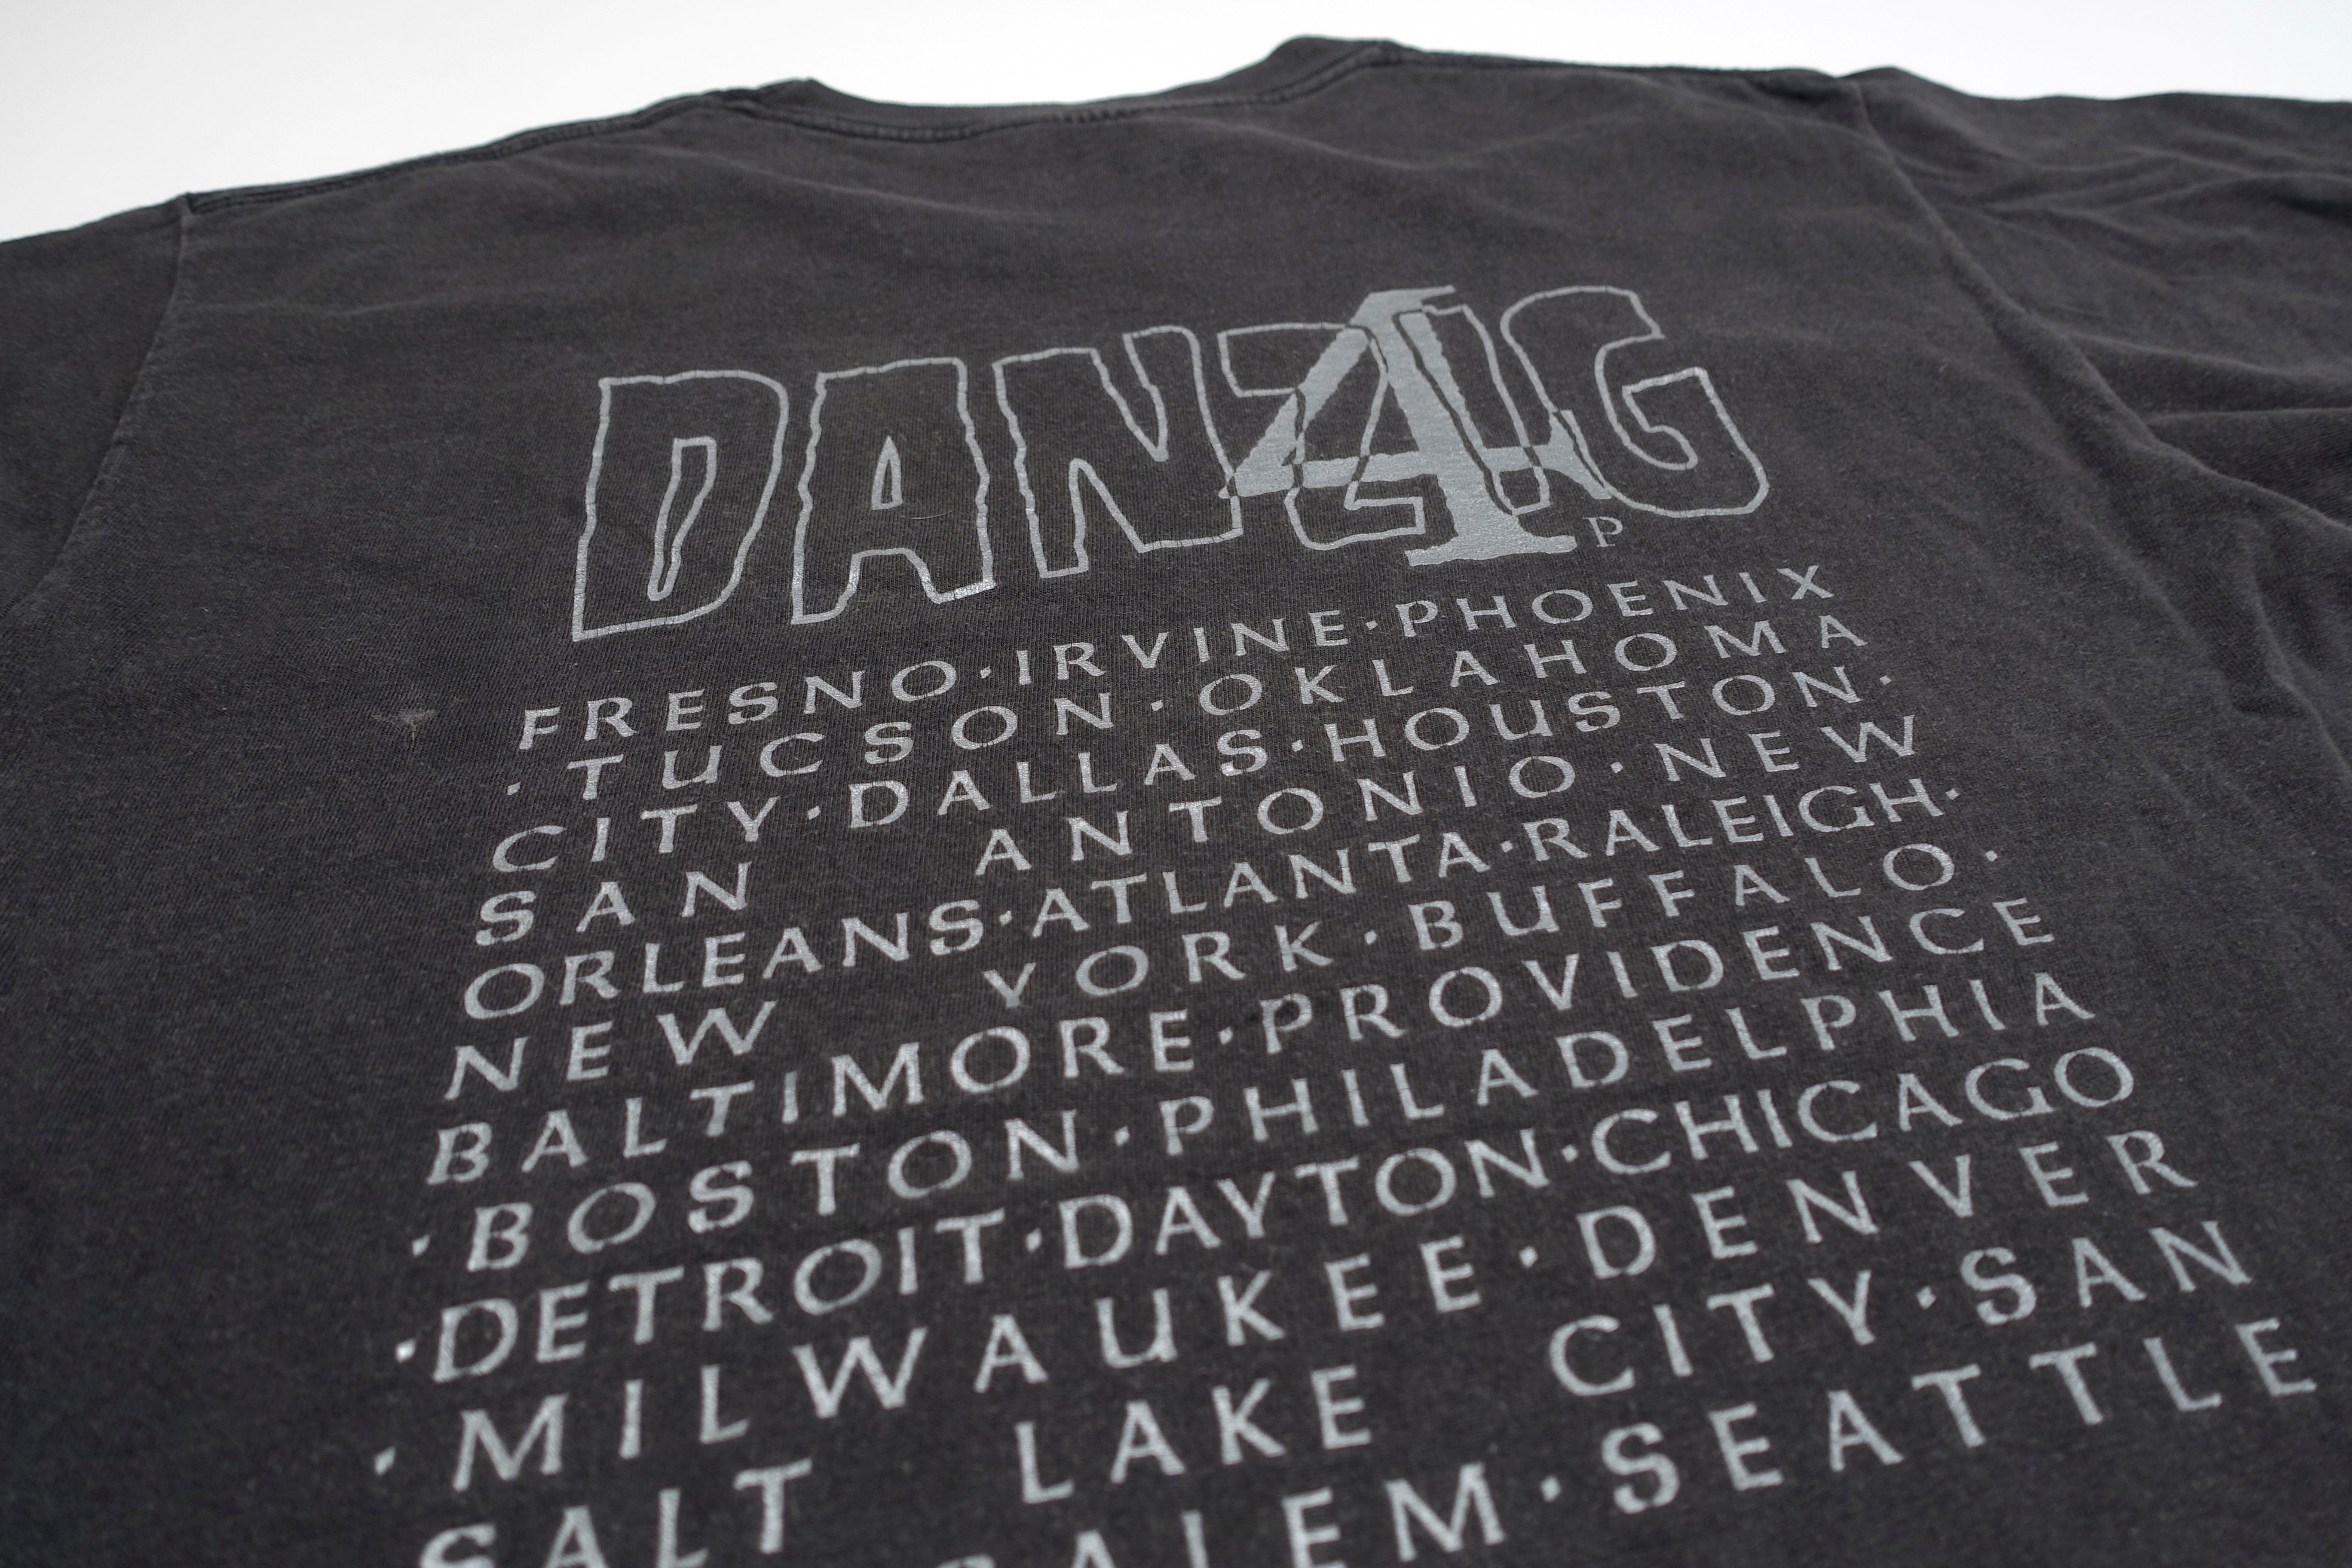 Danzig - 4P 1994 North American Tour Shirt Size Large (Faded Version)